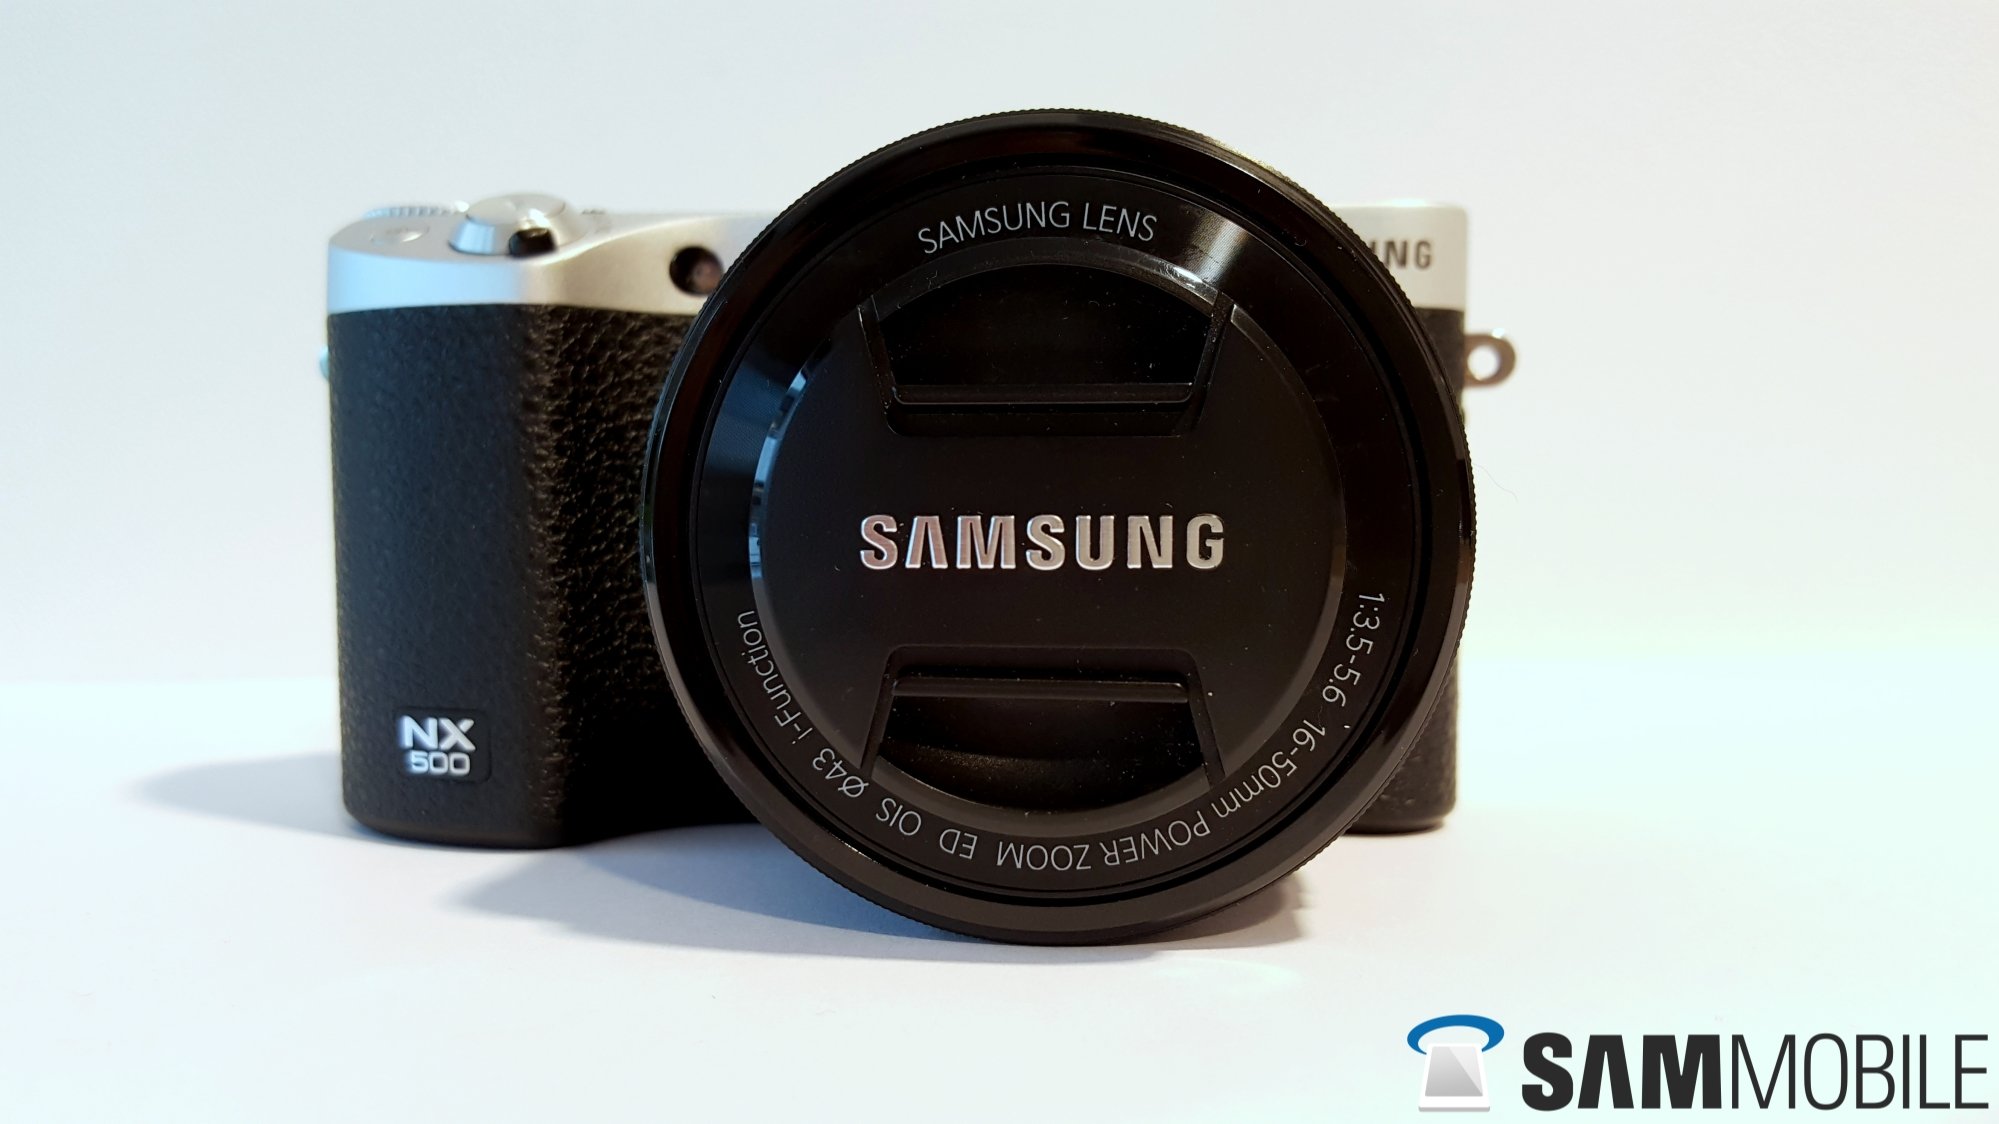 NX500 review: the best affordable system camera - - SamMobile